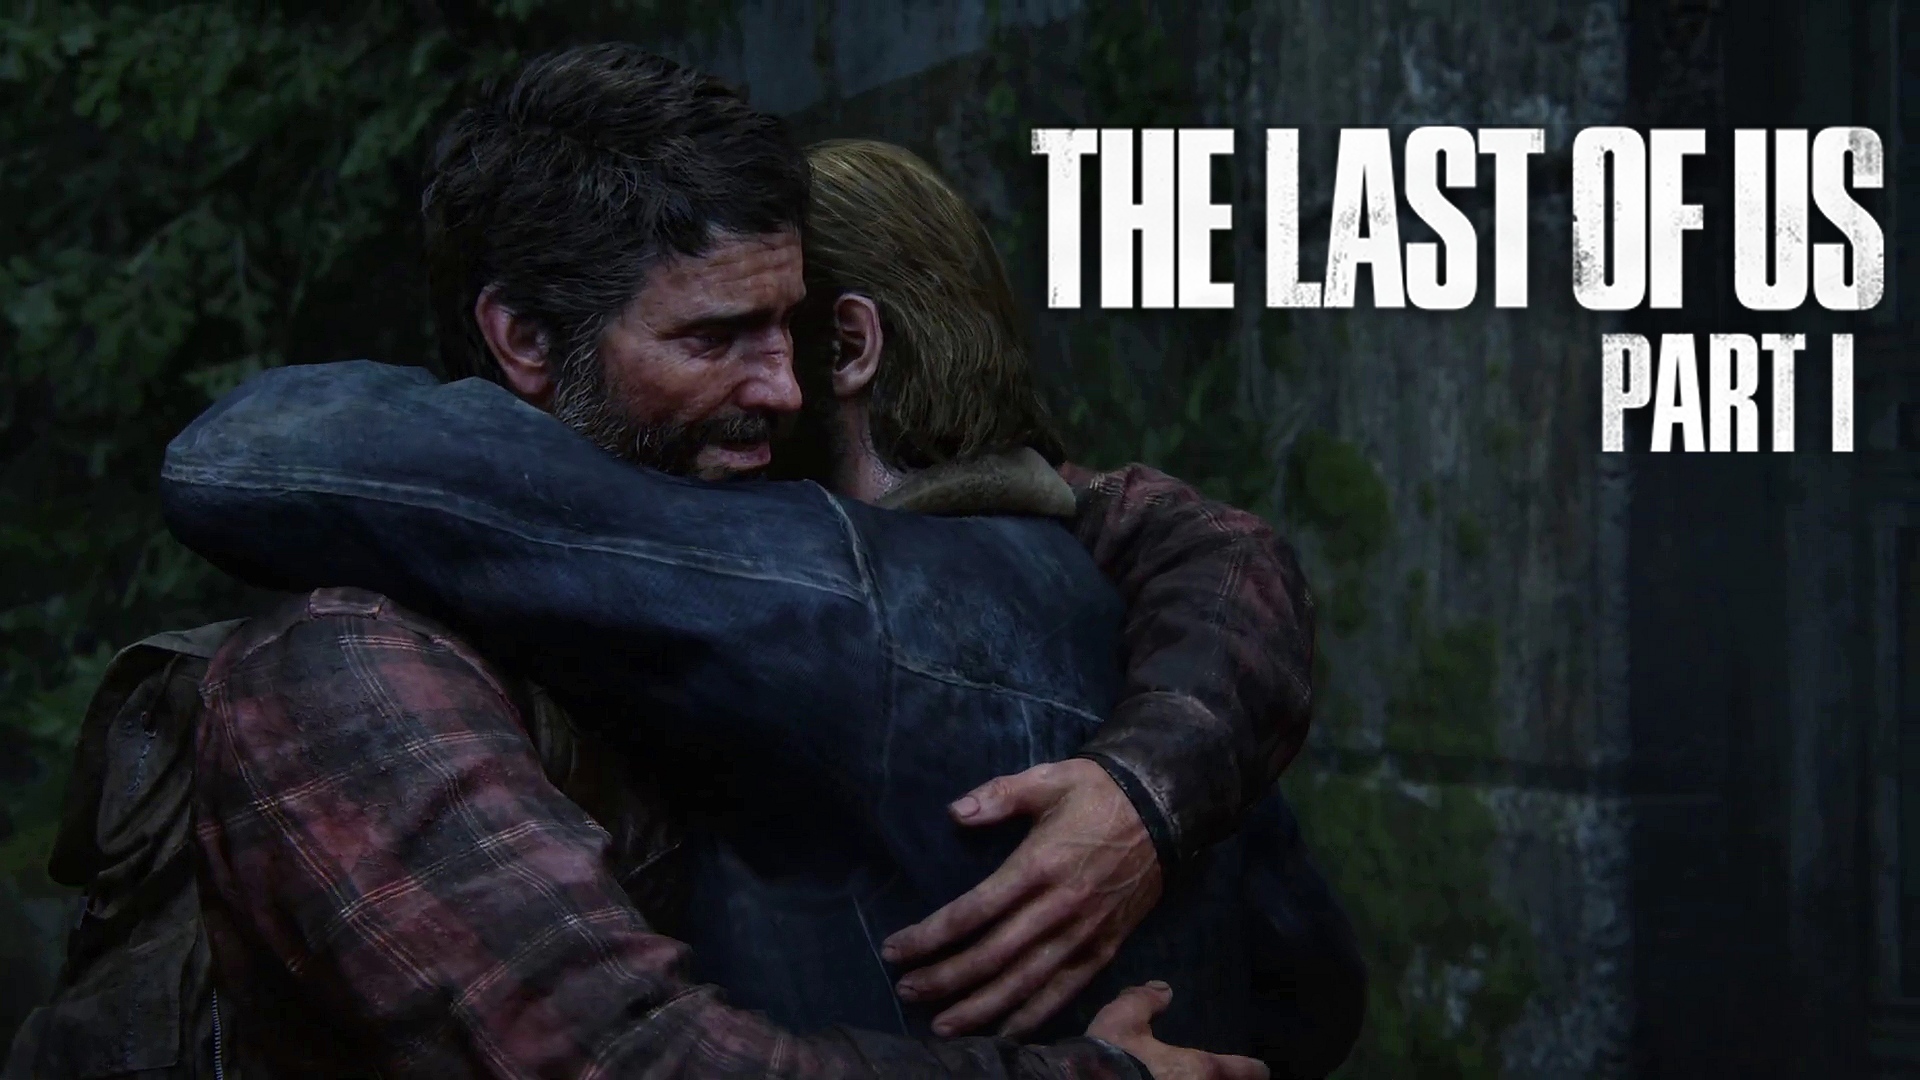 The last wife. Джоэл одни из нас. Джоэл и Томми. The last of us Part 1 ps5.